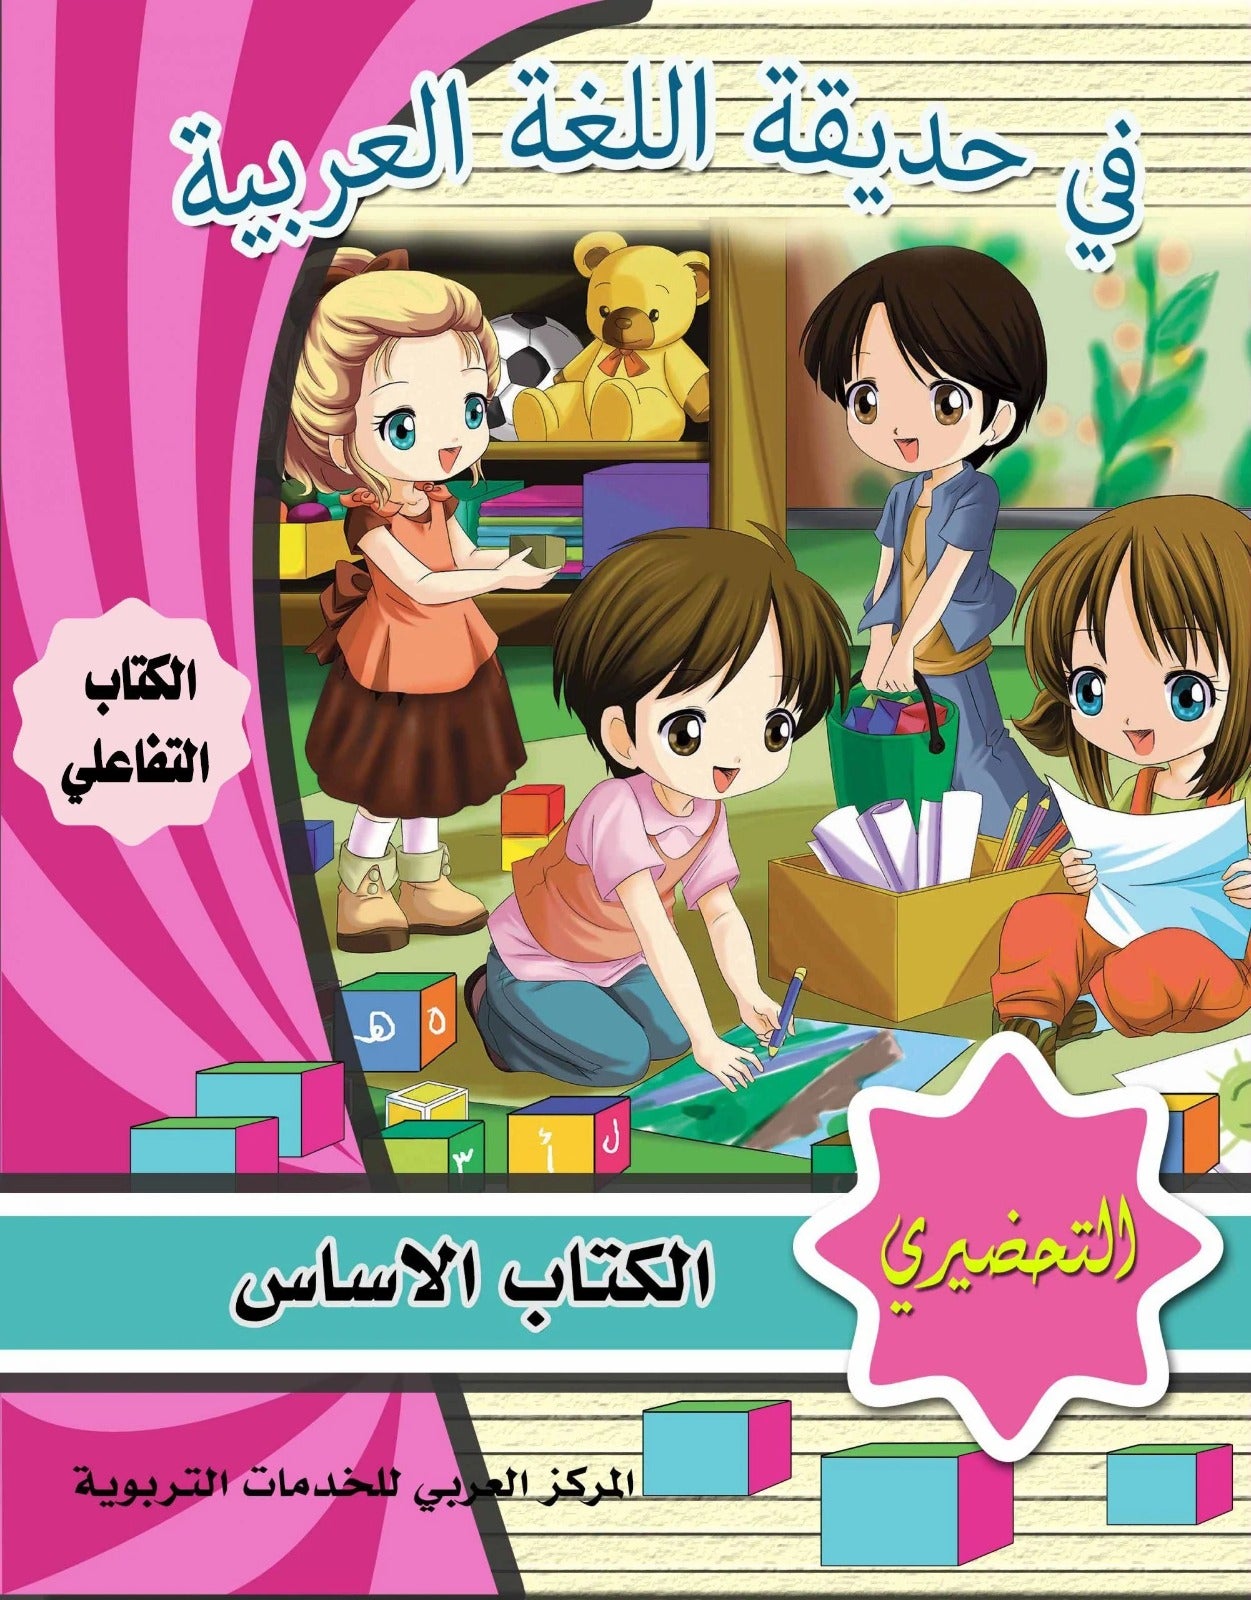 In the garden of the Arabic language: the preparatory level, the student's book + exercises 